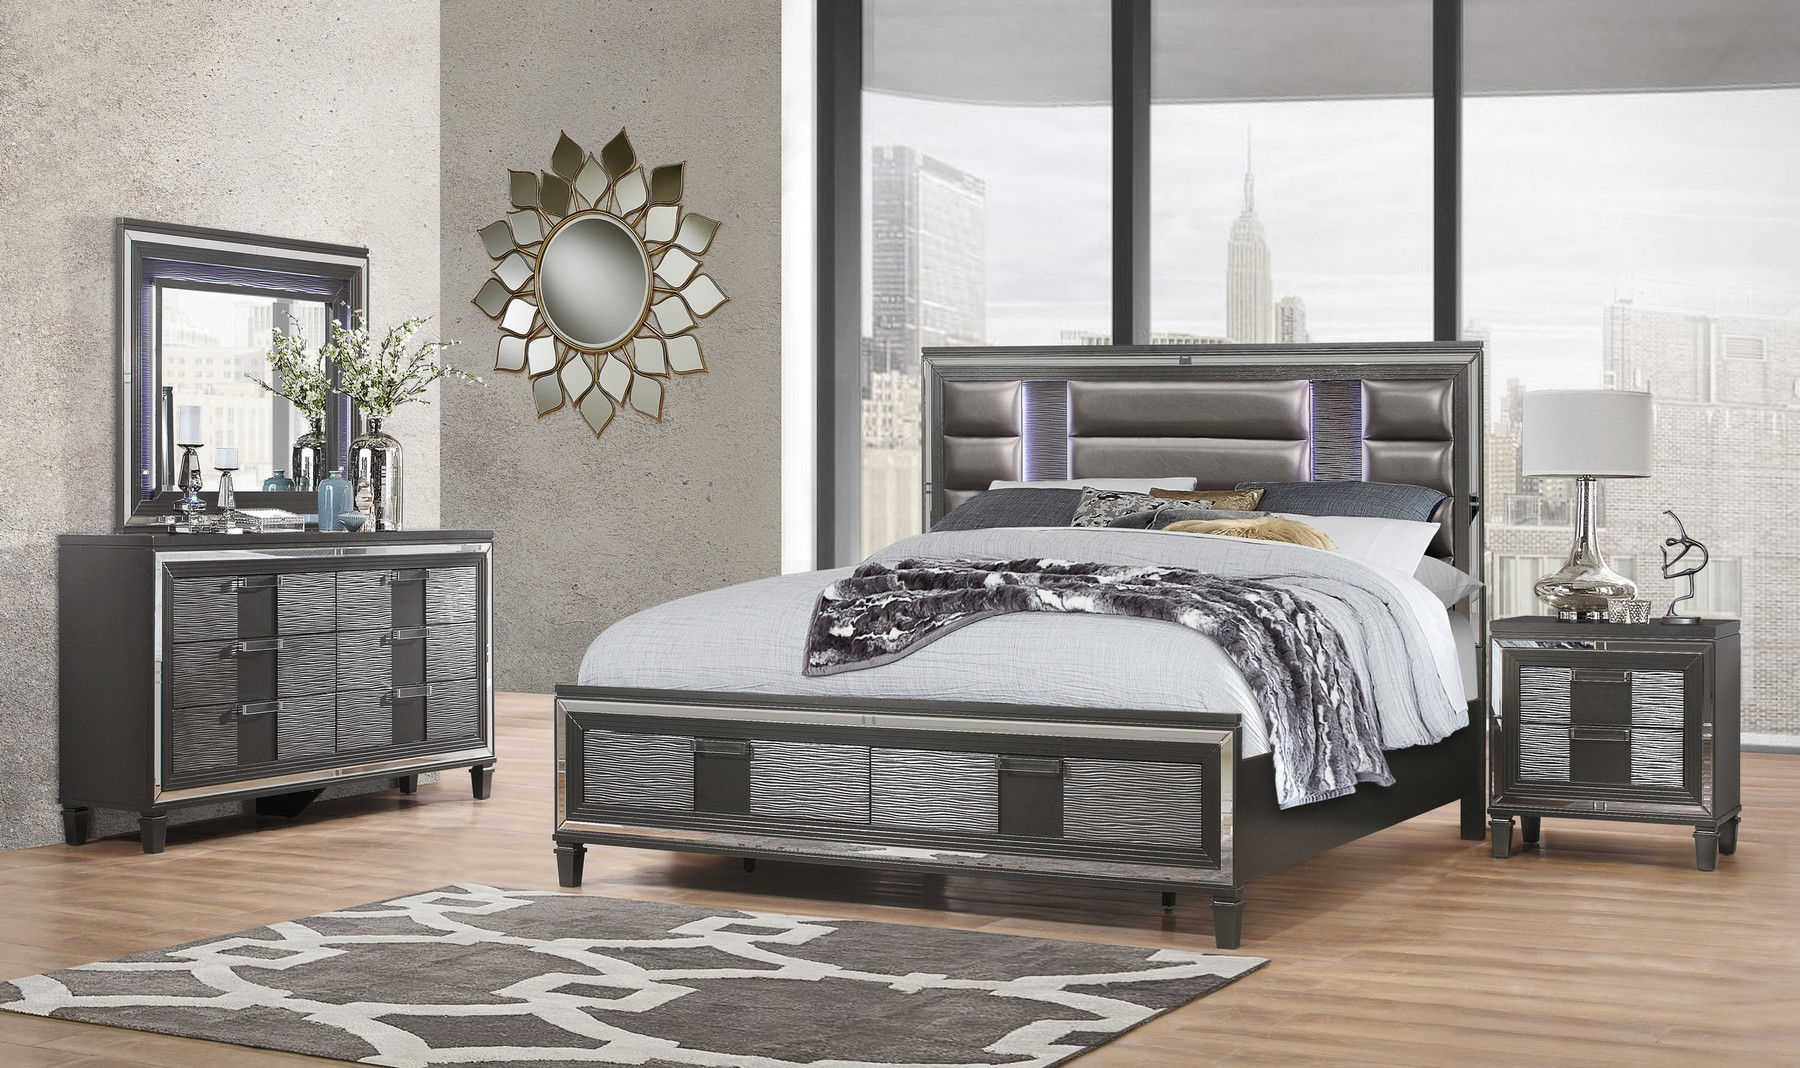 Pisa Queen Size Bed with regard to dimensions 1800 X 1068